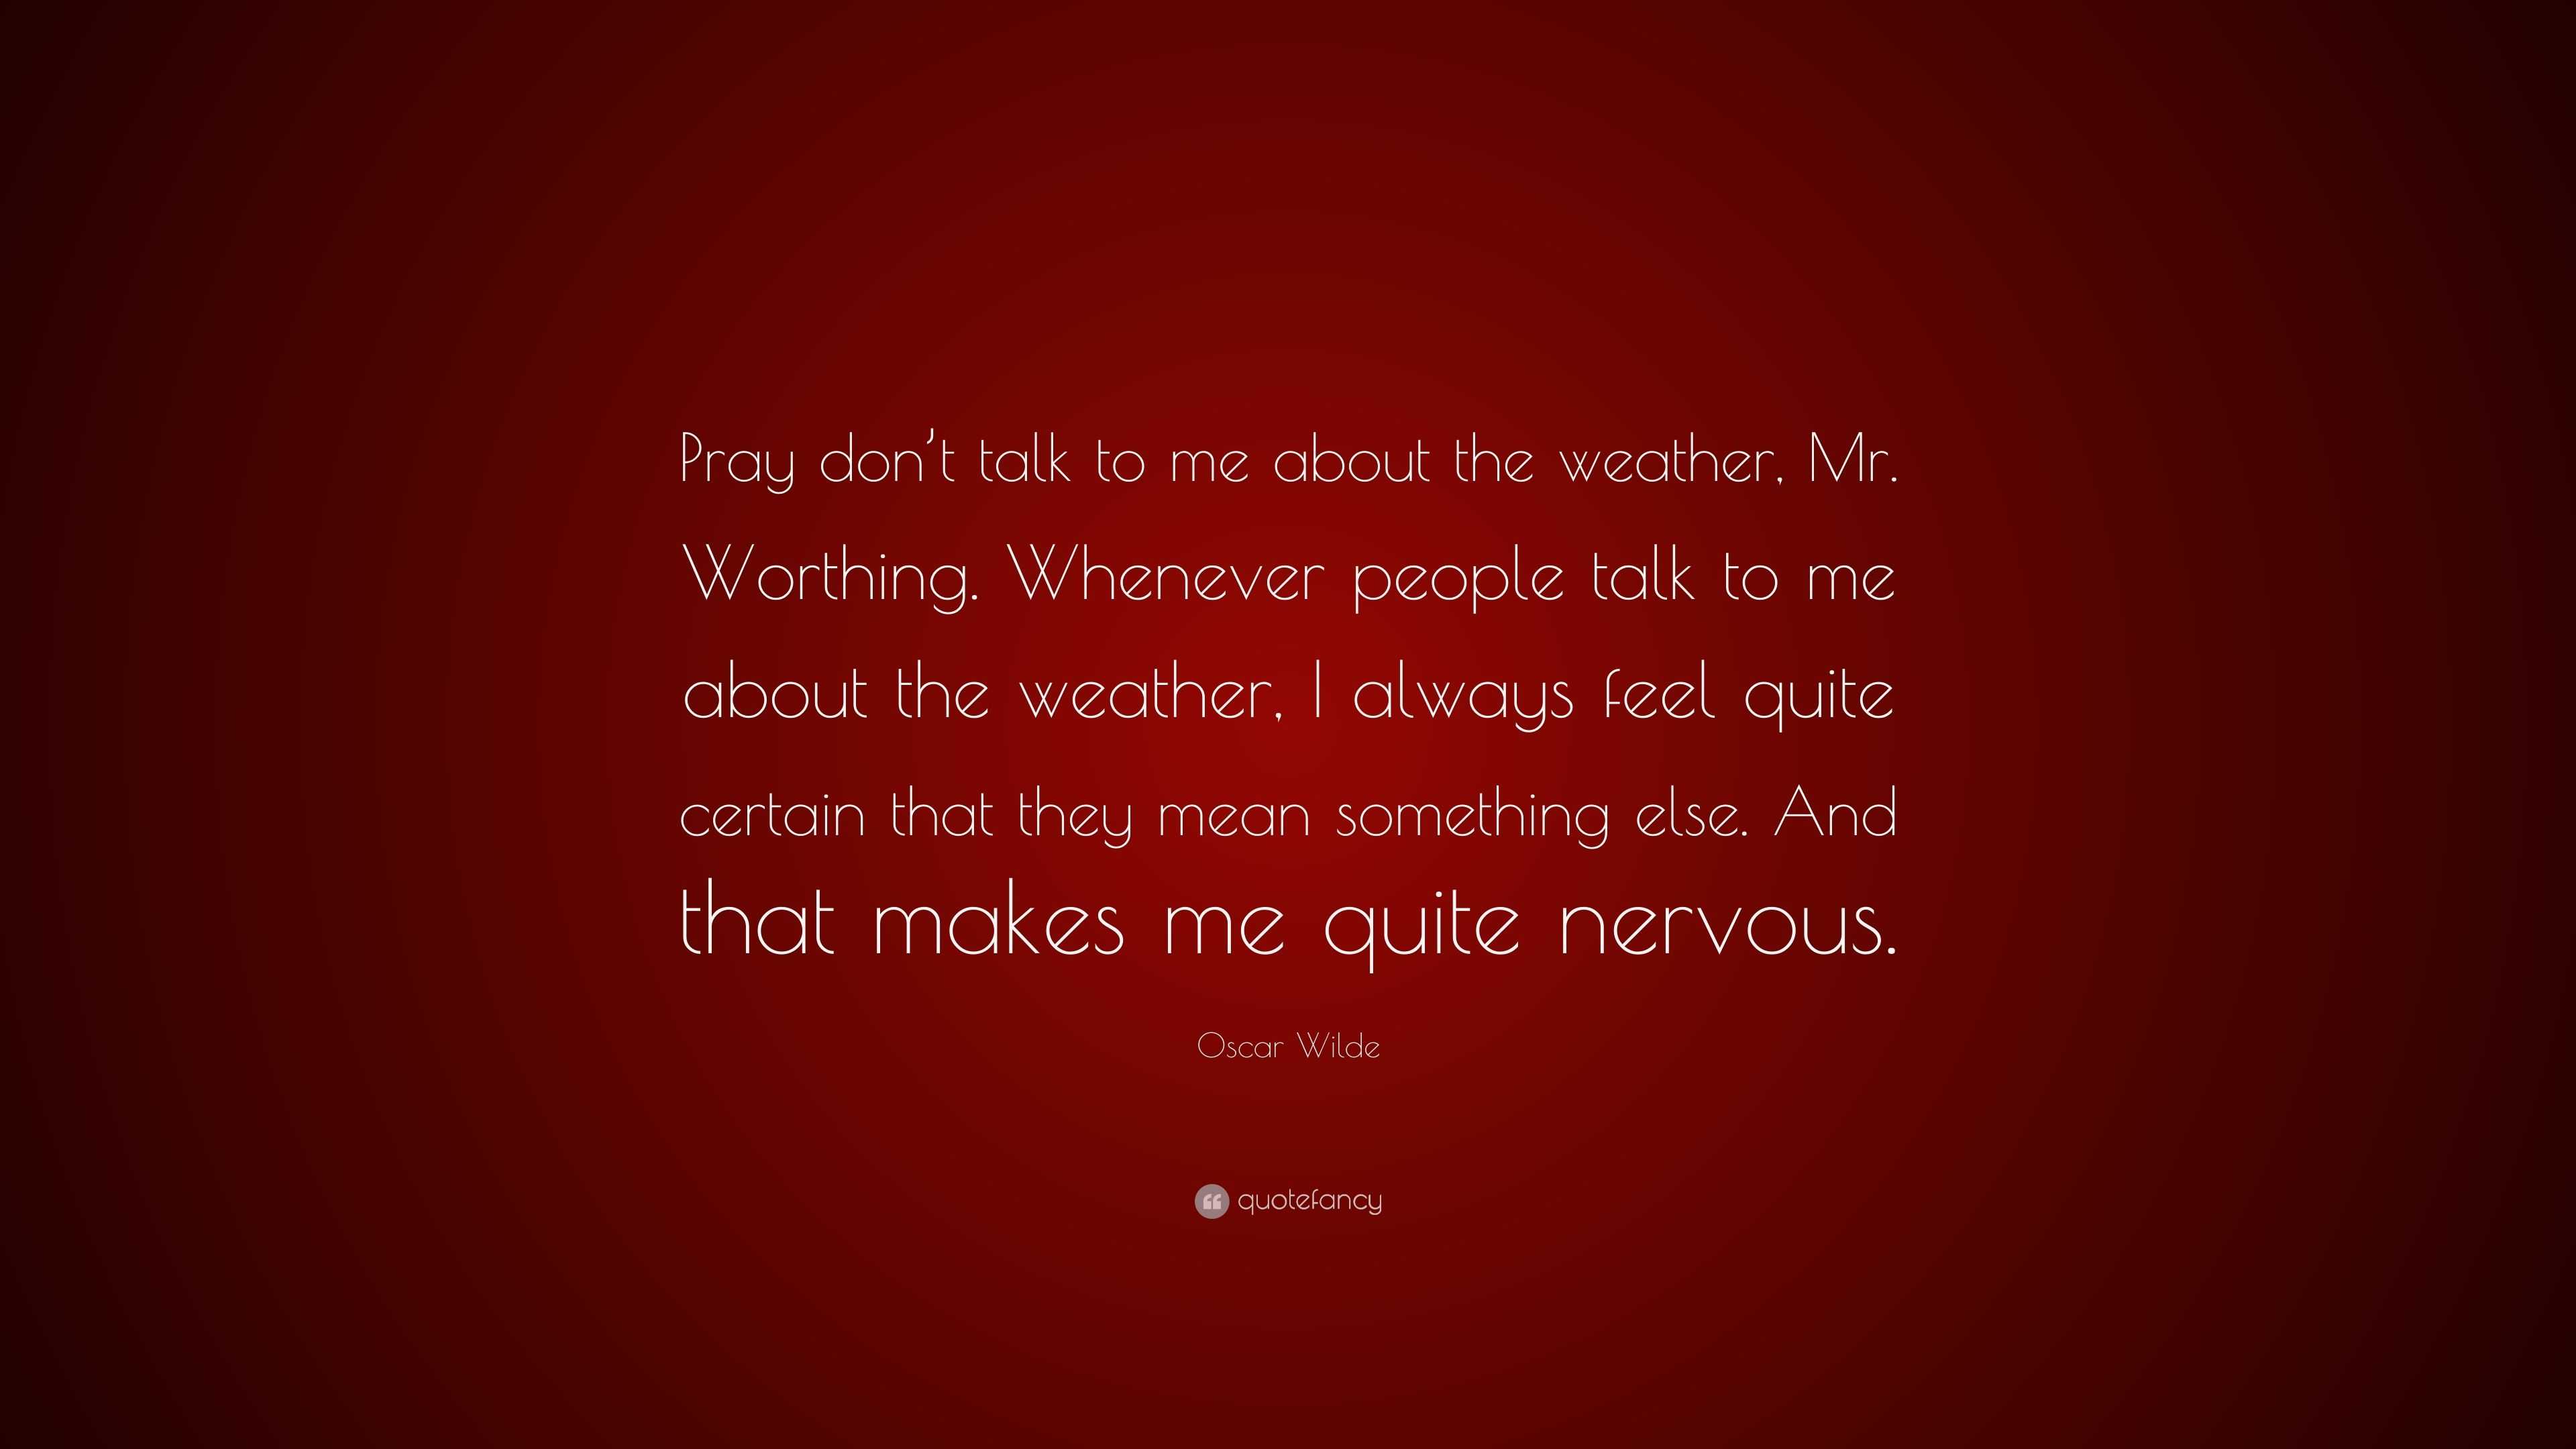 Oscar Wilde Quote: “Pray don’t talk to me about the weather, Mr ...